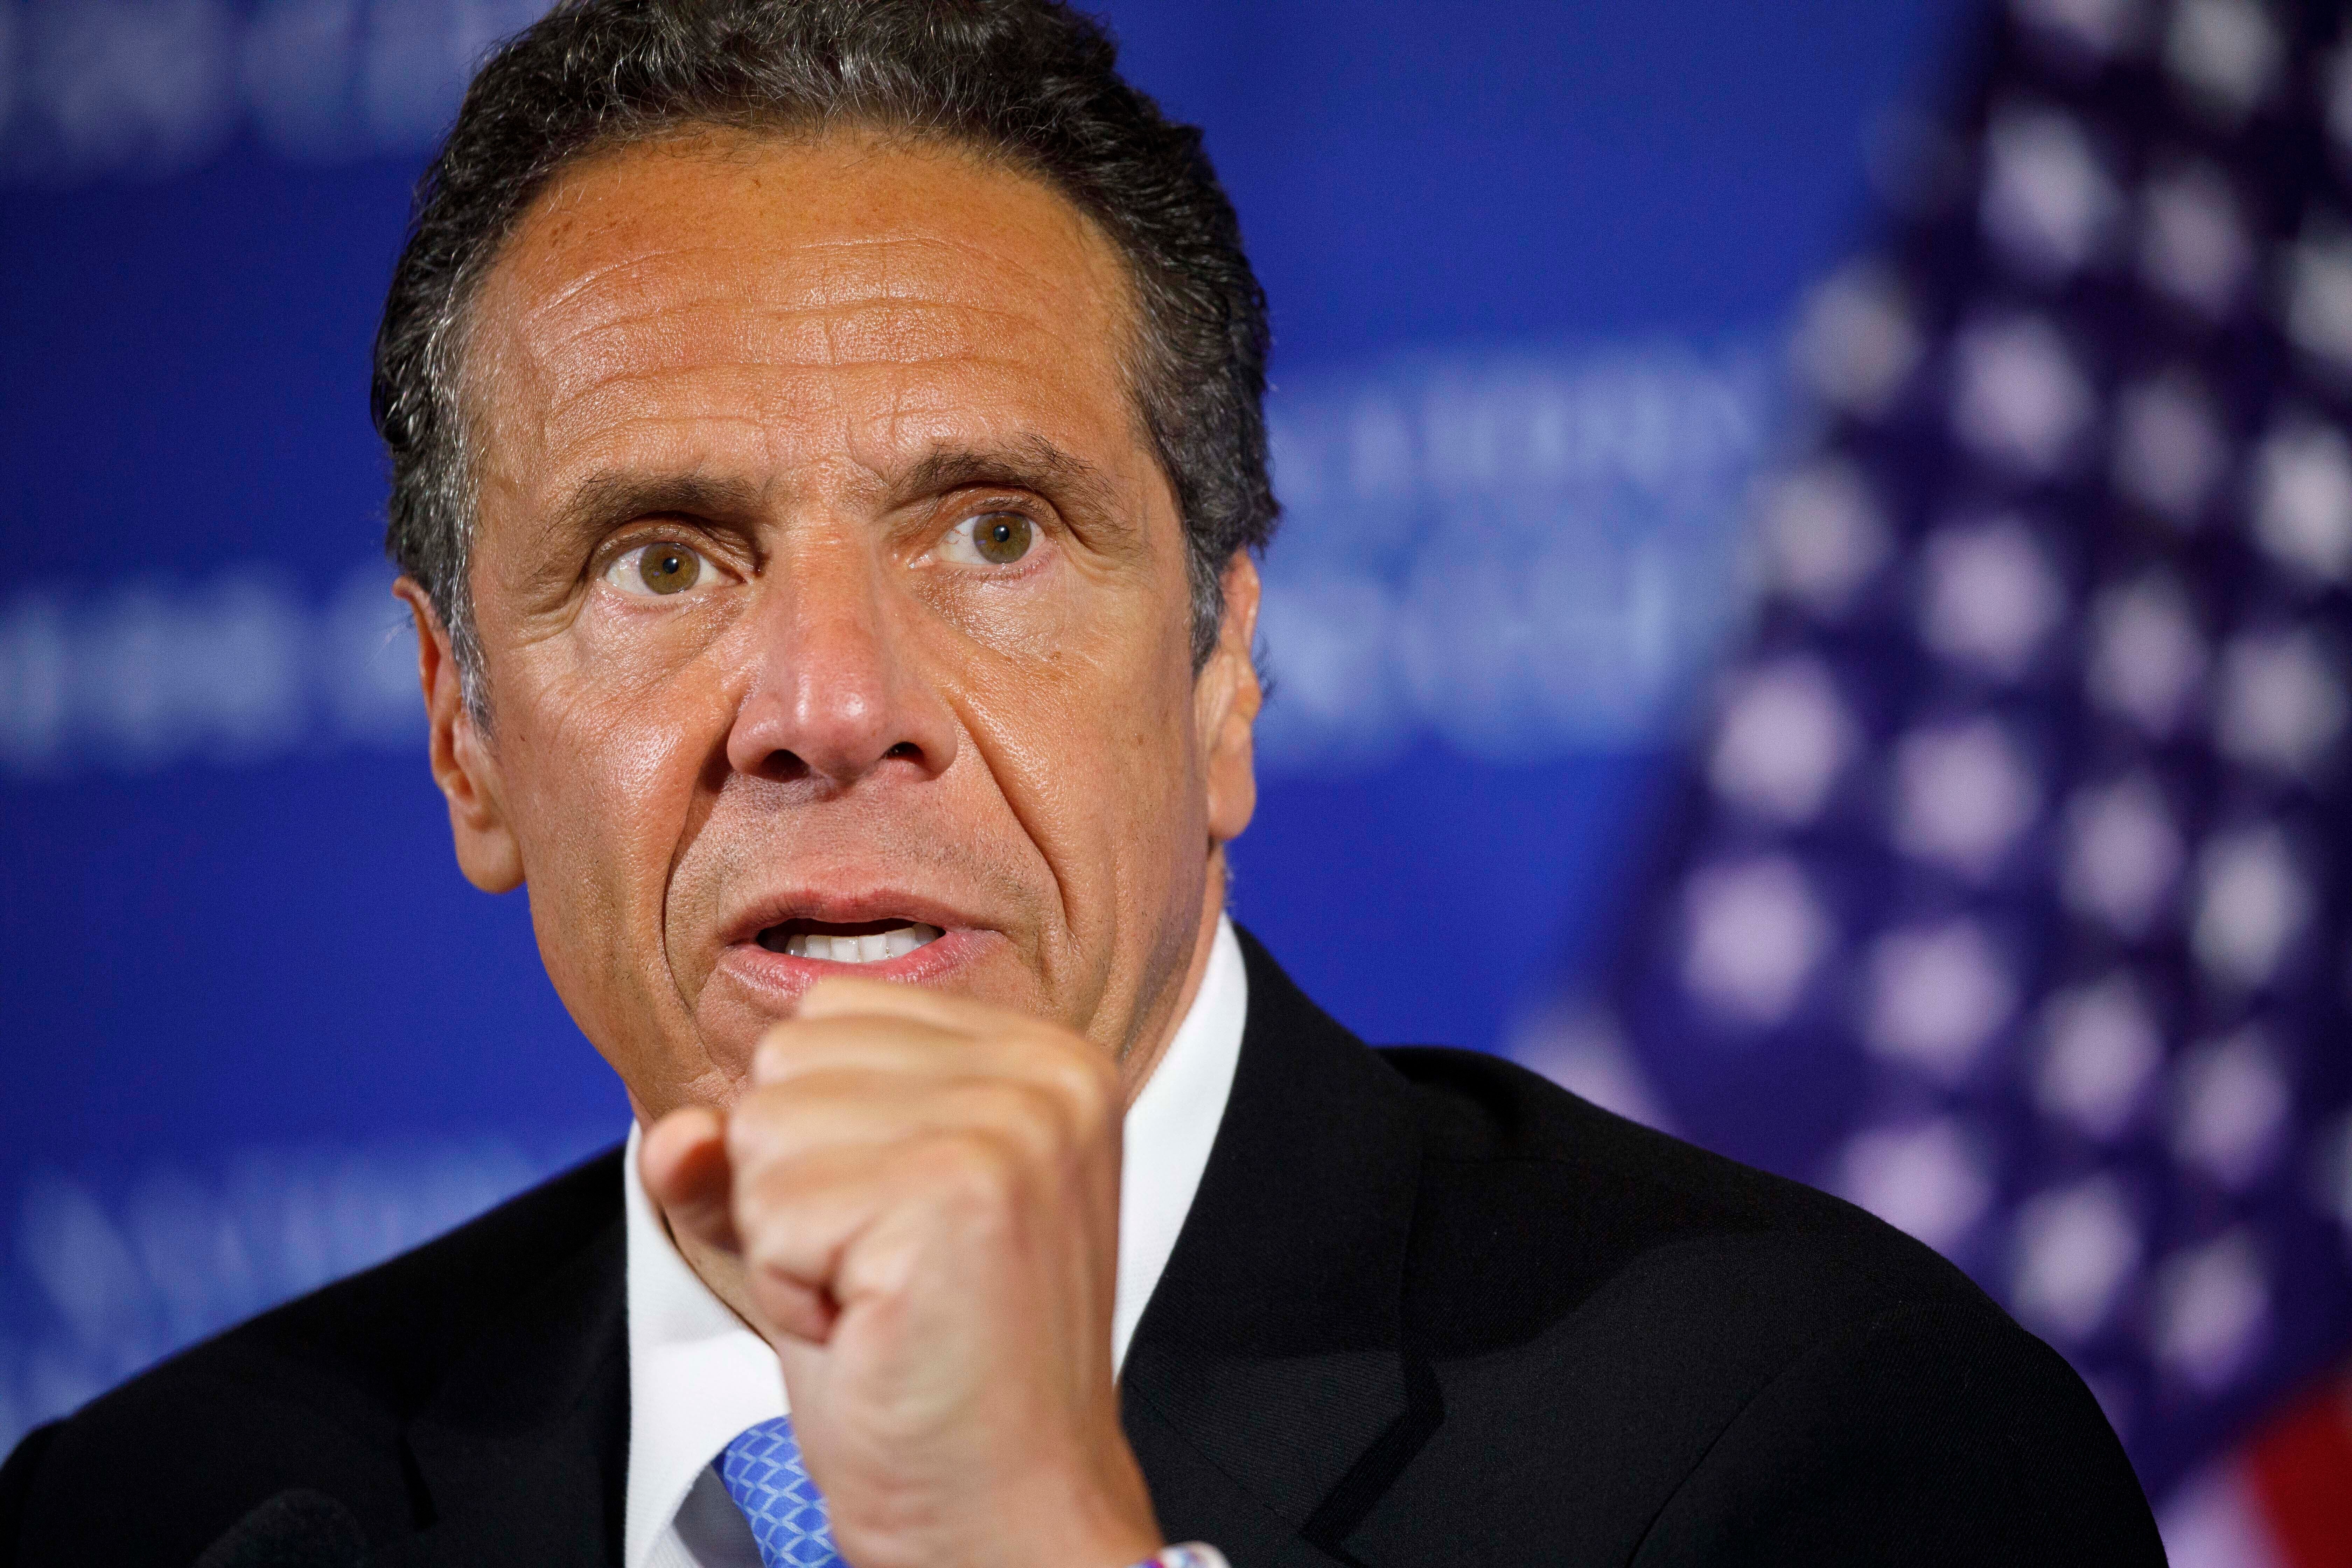 Andrew Cuomo accuser lashes out at ‘predatory’ Gov over his supposed apology